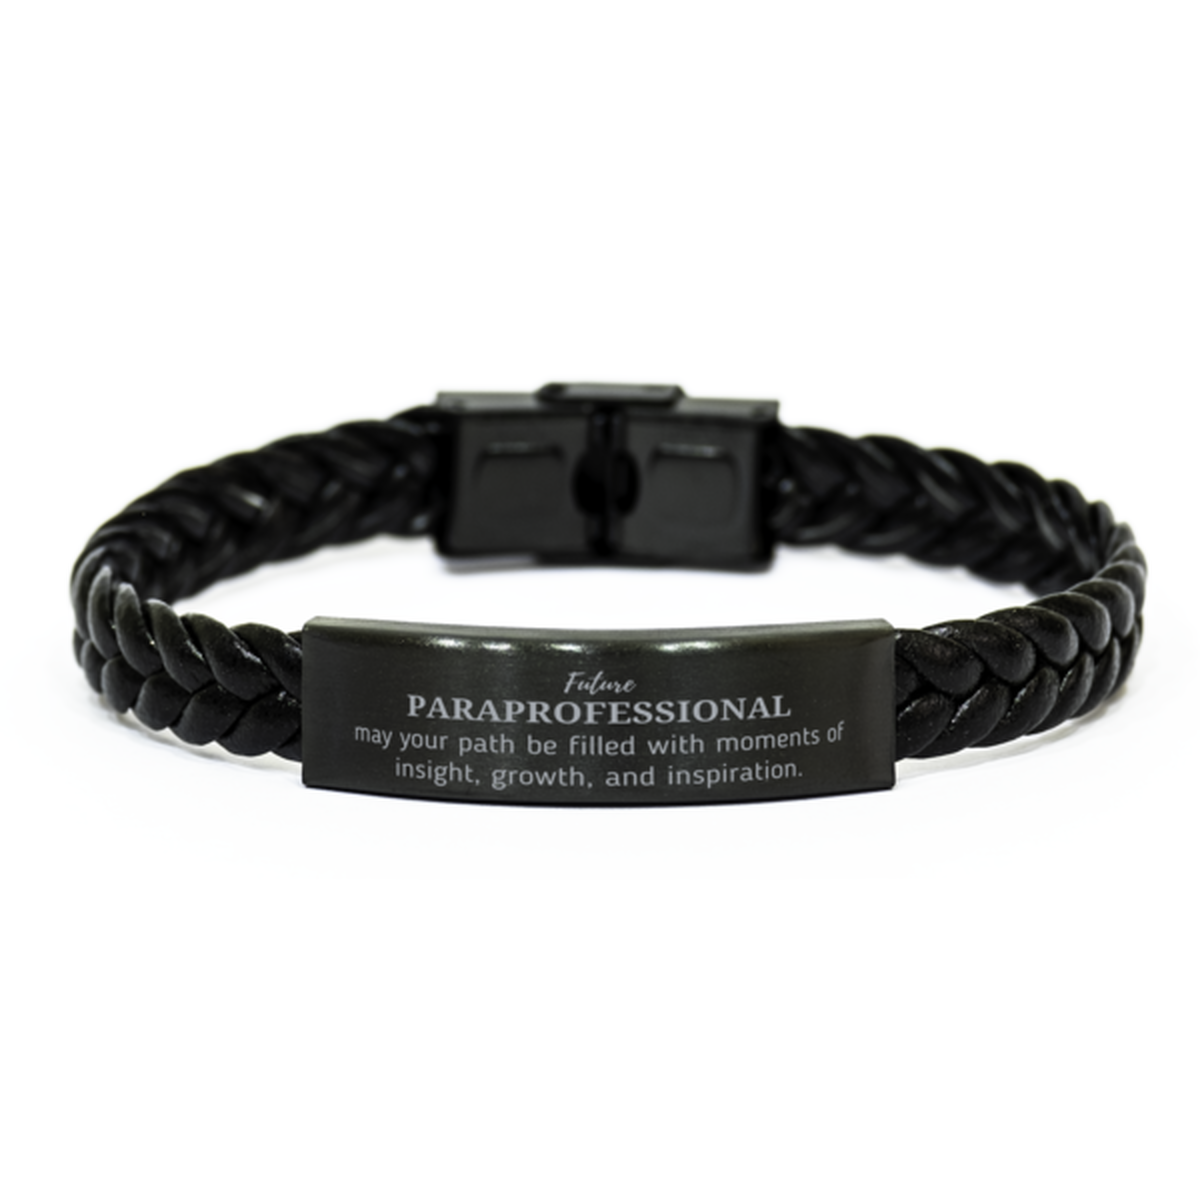 Future Paraprofessional Gifts, May your path be filled with moments of insight, Graduation Gifts for New Paraprofessional, Christmas Unique Braided Leather Bracelet For Men, Women, Friends